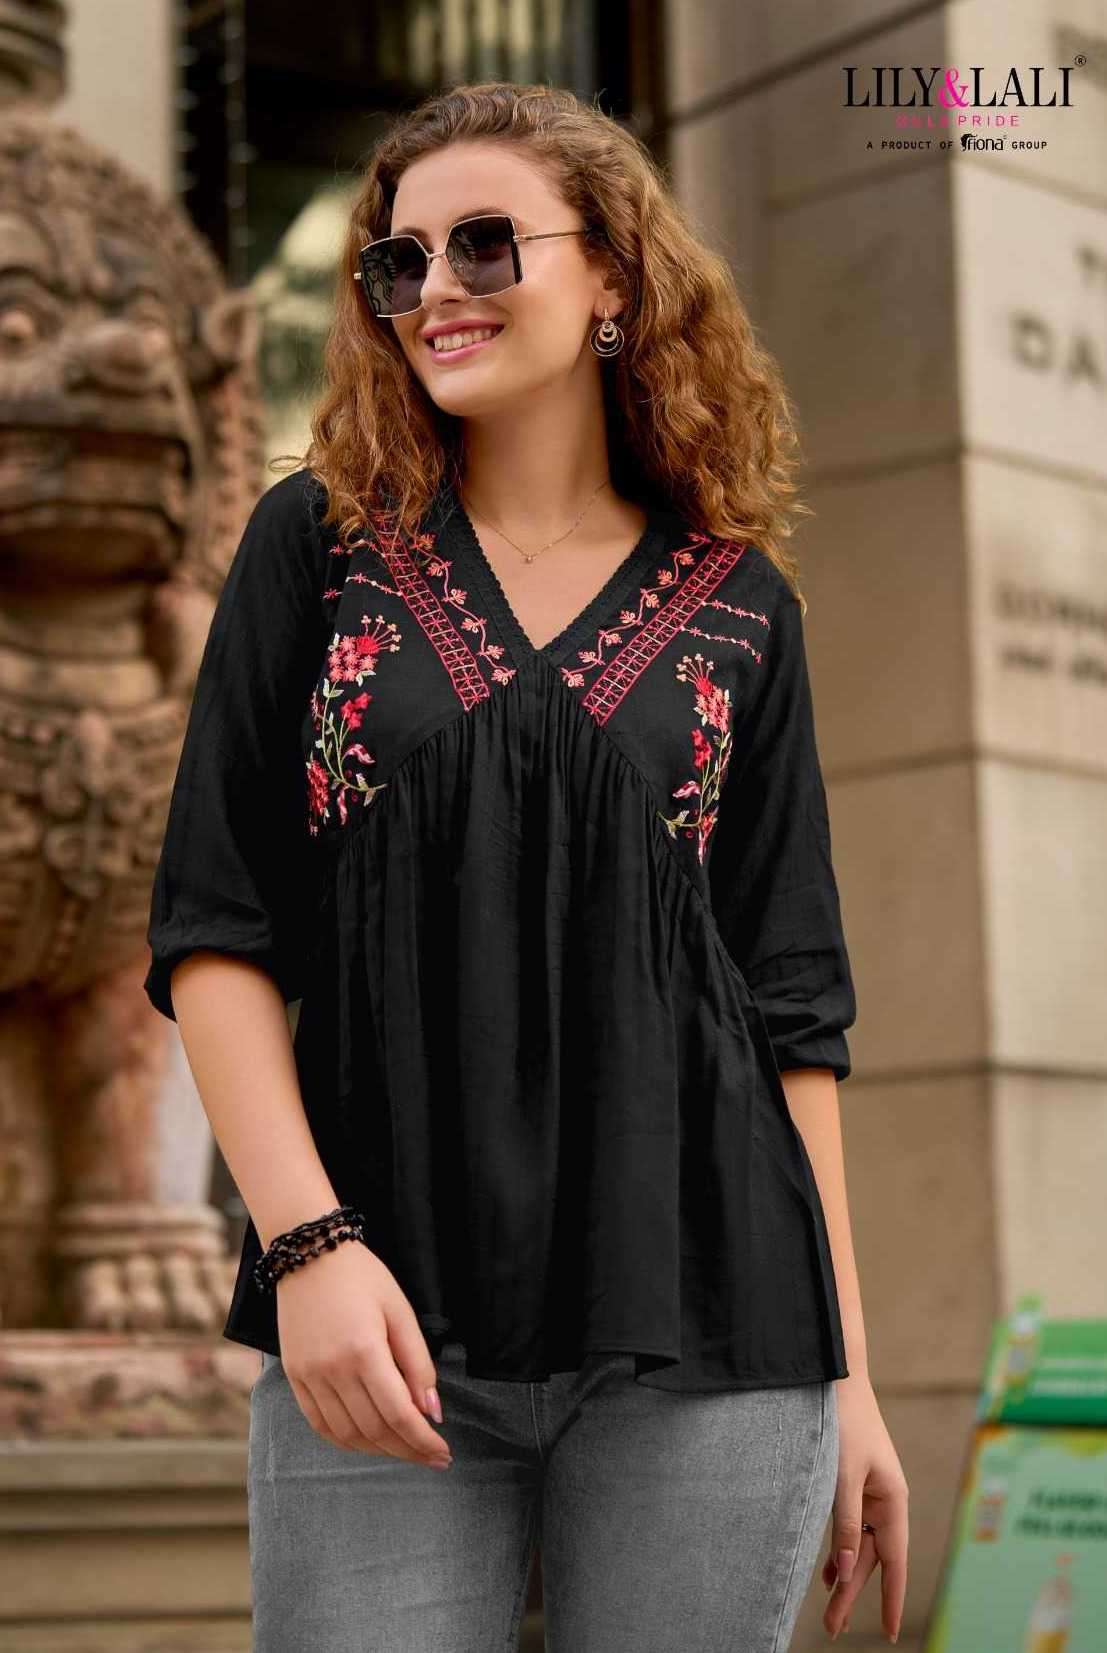 MELODY VOL-4 SERIES 18101 TO 18108 BY LILY & LALI DESIGNER WITH EMBROIDERY WORK VISCOSE RAYON SHORT TOPS ARE AVAILABLE AT WHOLESALE PRICE